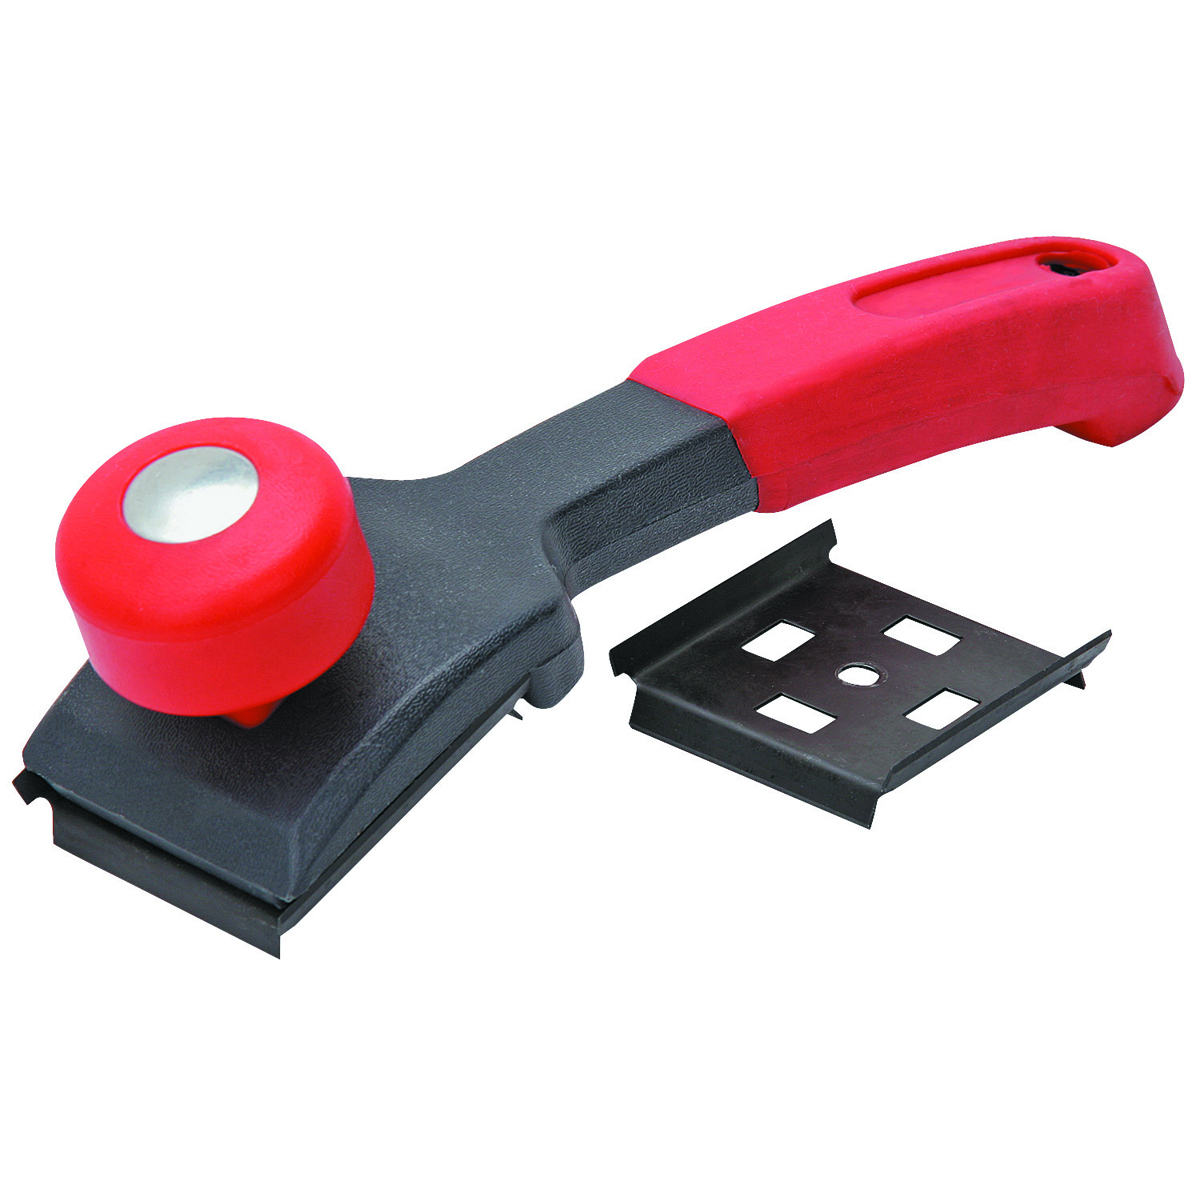 PITTSBURGH 2-1/2 in. Paint Scraper with 4 Sided Blade - Item 99827